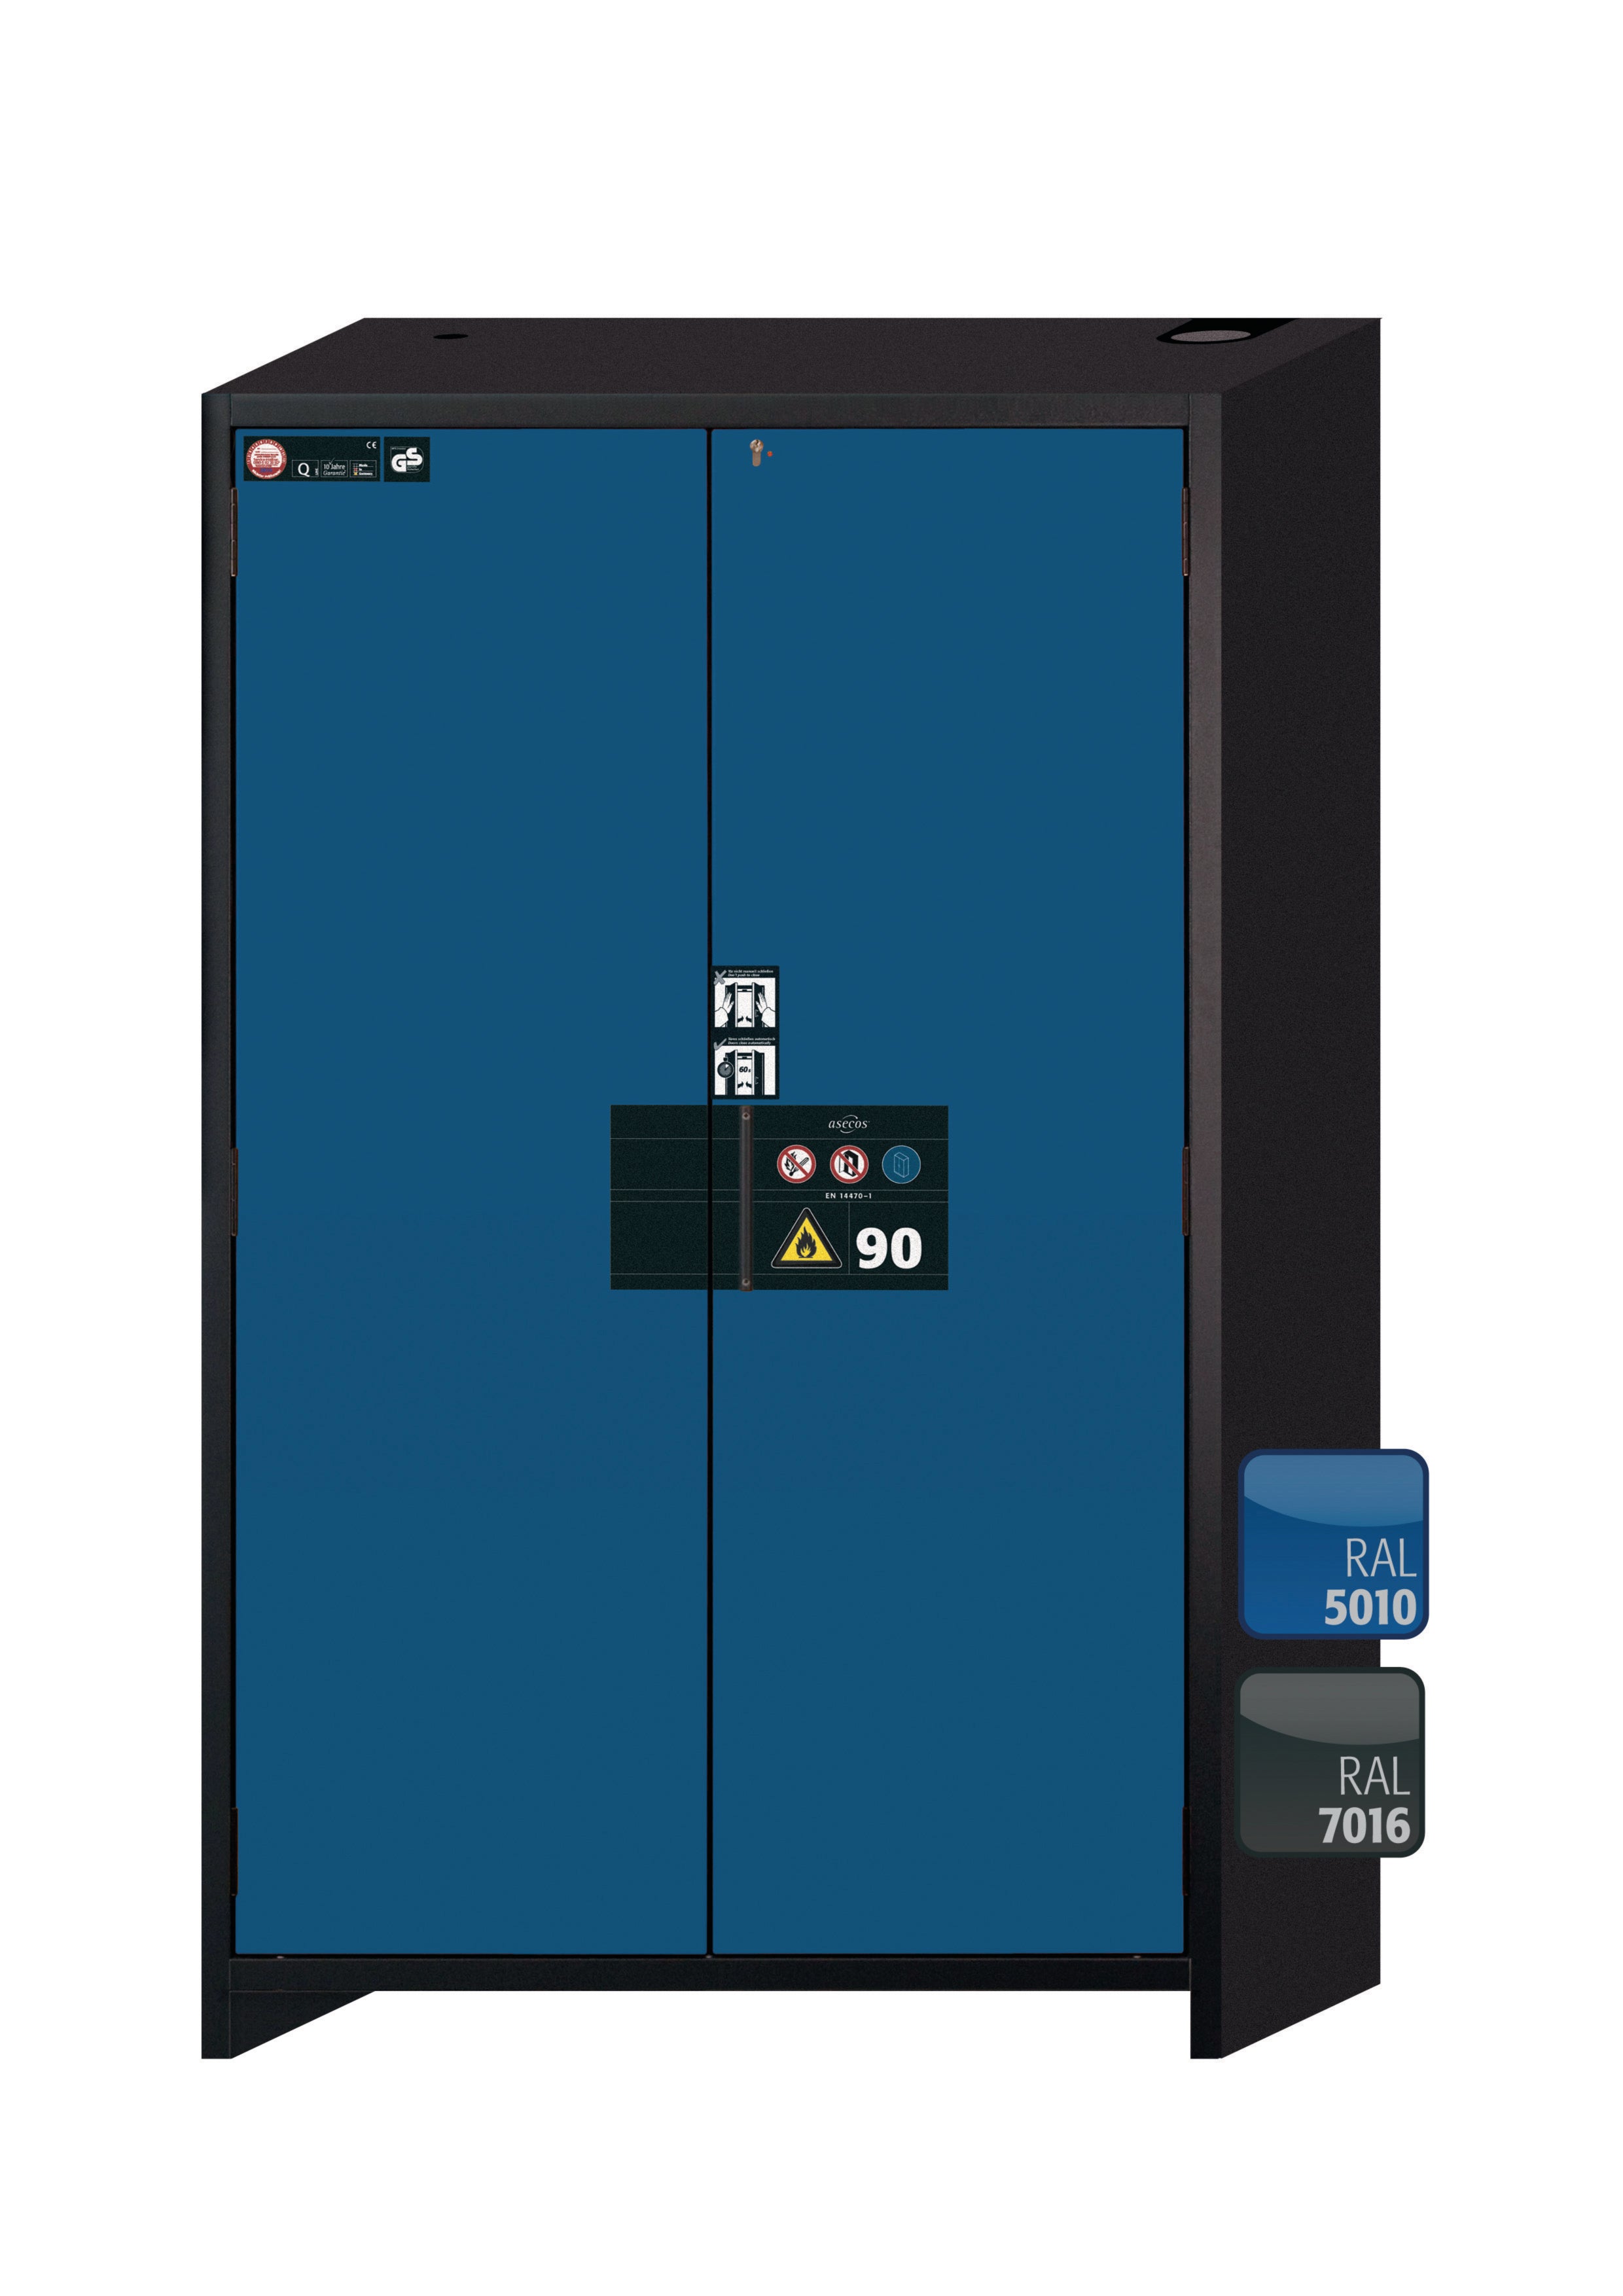 Type 90 safety storage cabinet Q-PEGASUS-90 model Q90.195.120.WDAC in gentian blue RAL 5010 with 3x drawer (standard) (sheet steel),